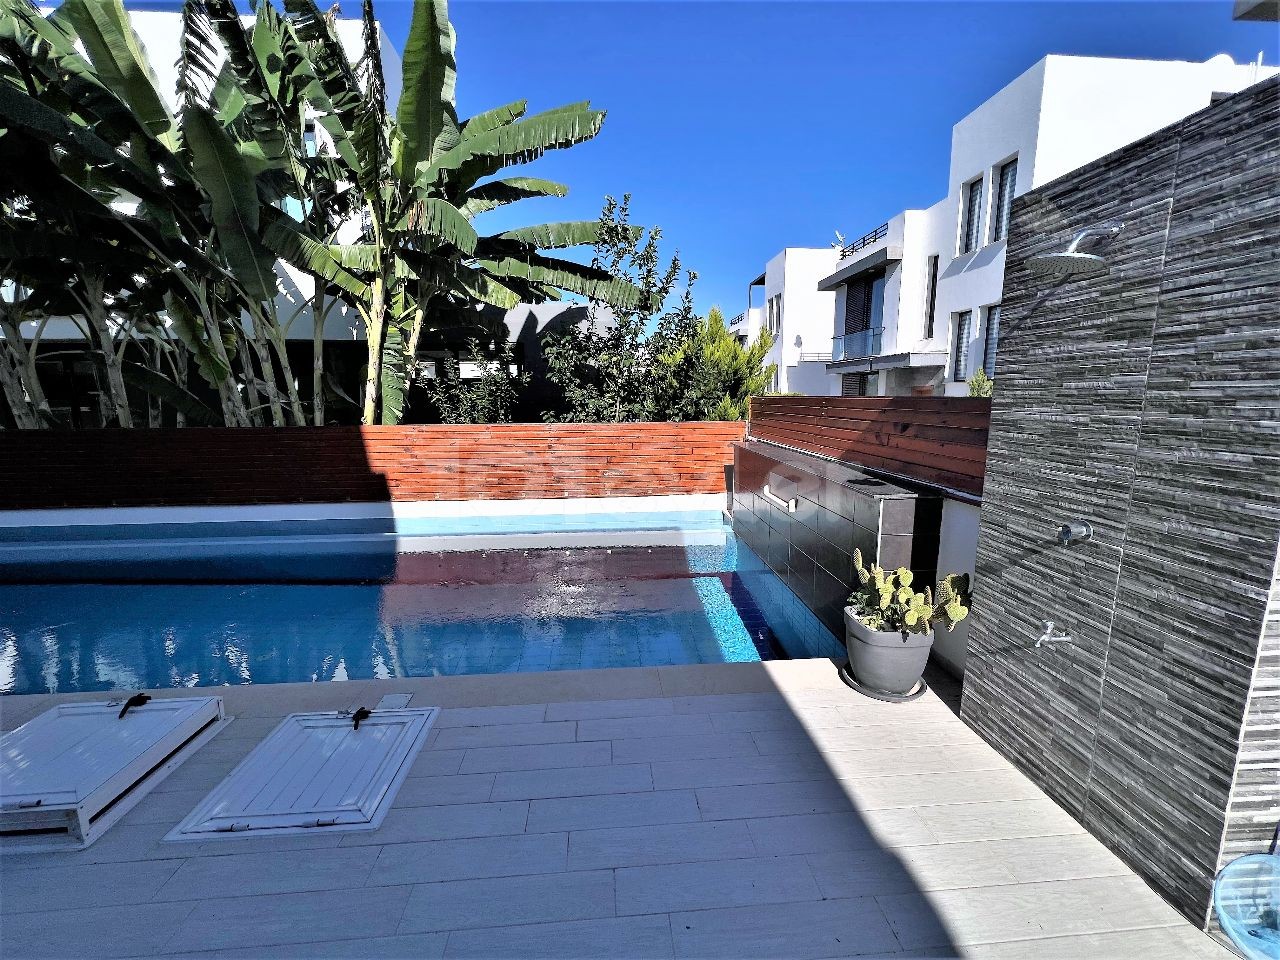 Luxry 3 bedroom villa in Alsacak close to Escape beach. With a beautiful sea and mountain views, ready to move in. Ready exchange title deed.05338403555